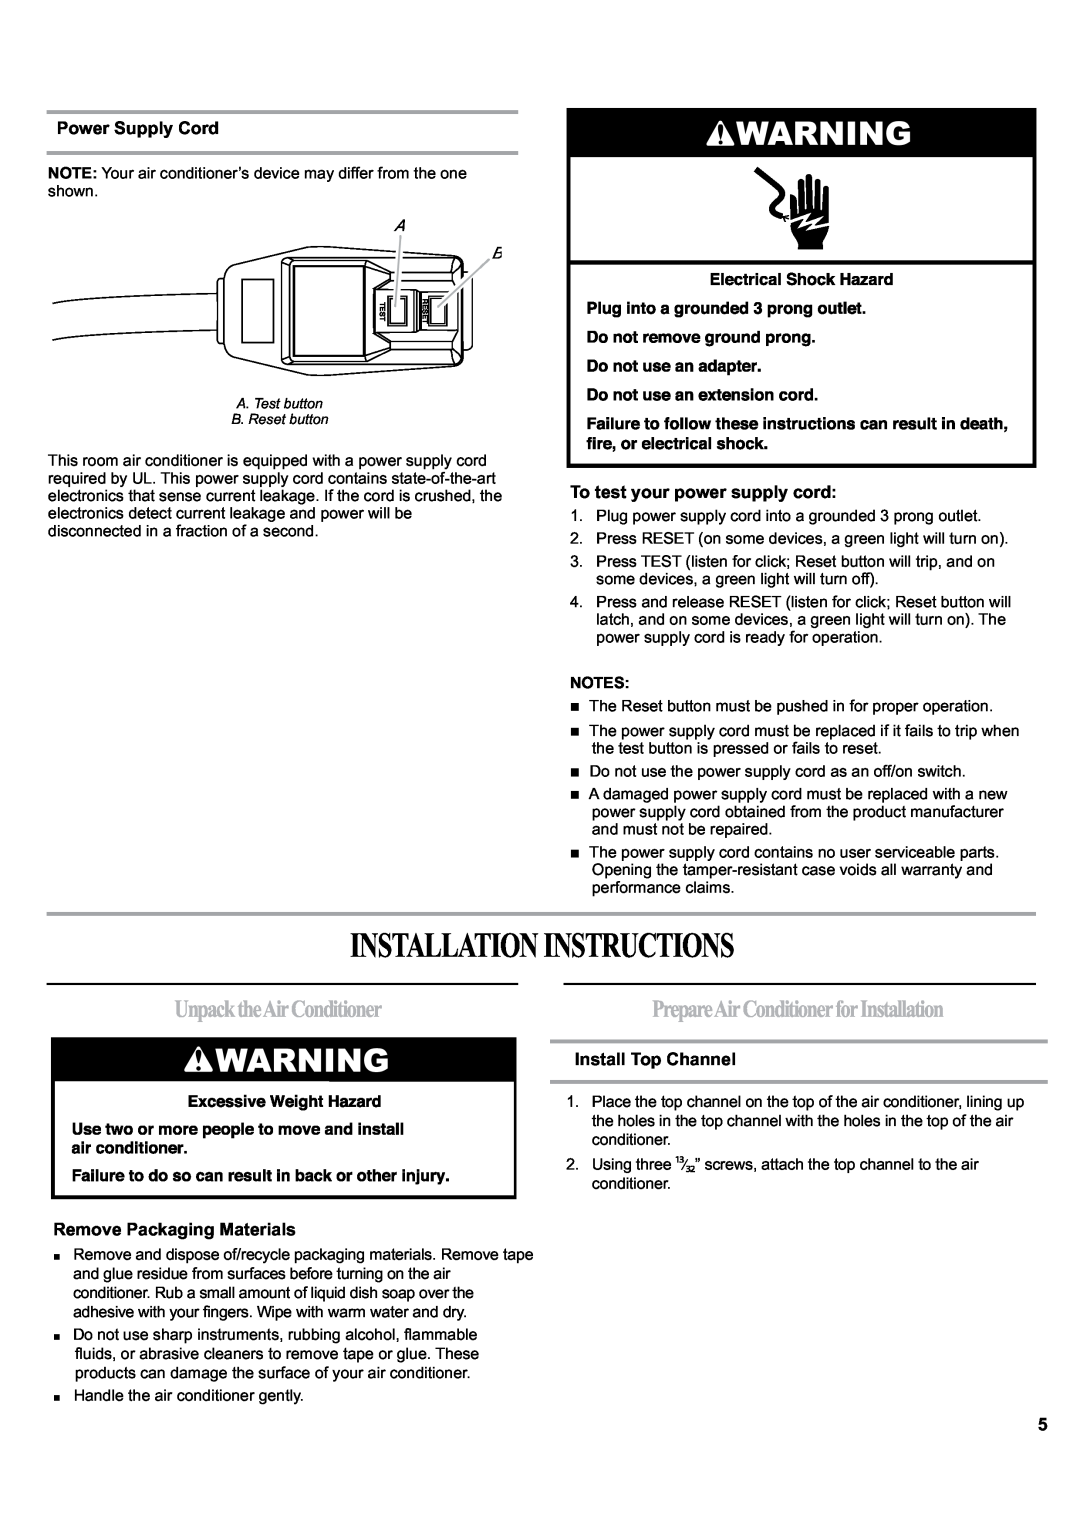 Haier ESA405K manual Installationinstructions, UnpacktheAirConditioner, Power Supply Cord, To test your power supply cord 